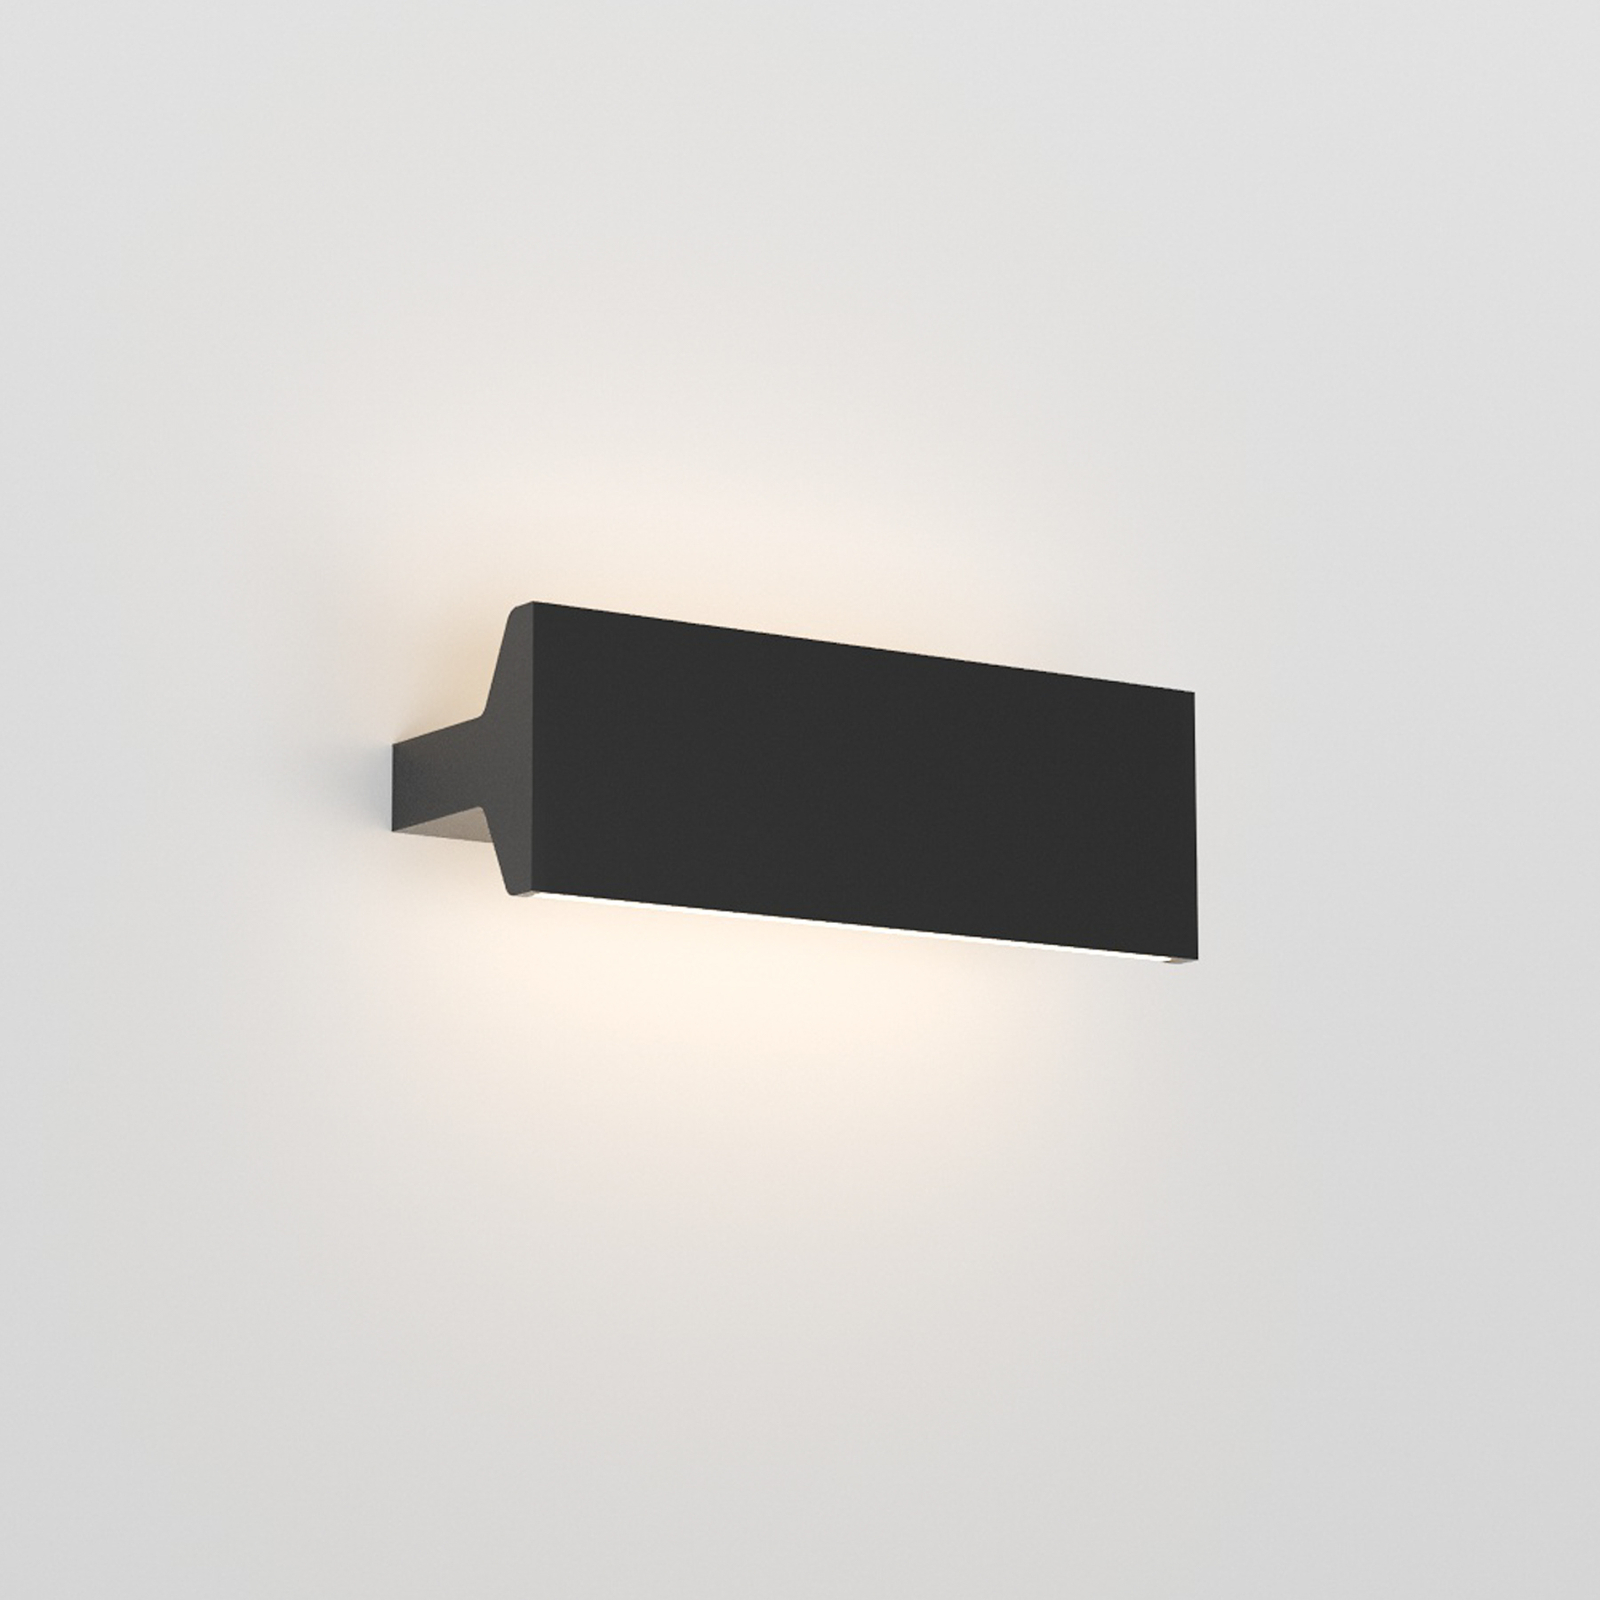 Rotaliana Ipe W2 dimmable phase 3 000 K noire